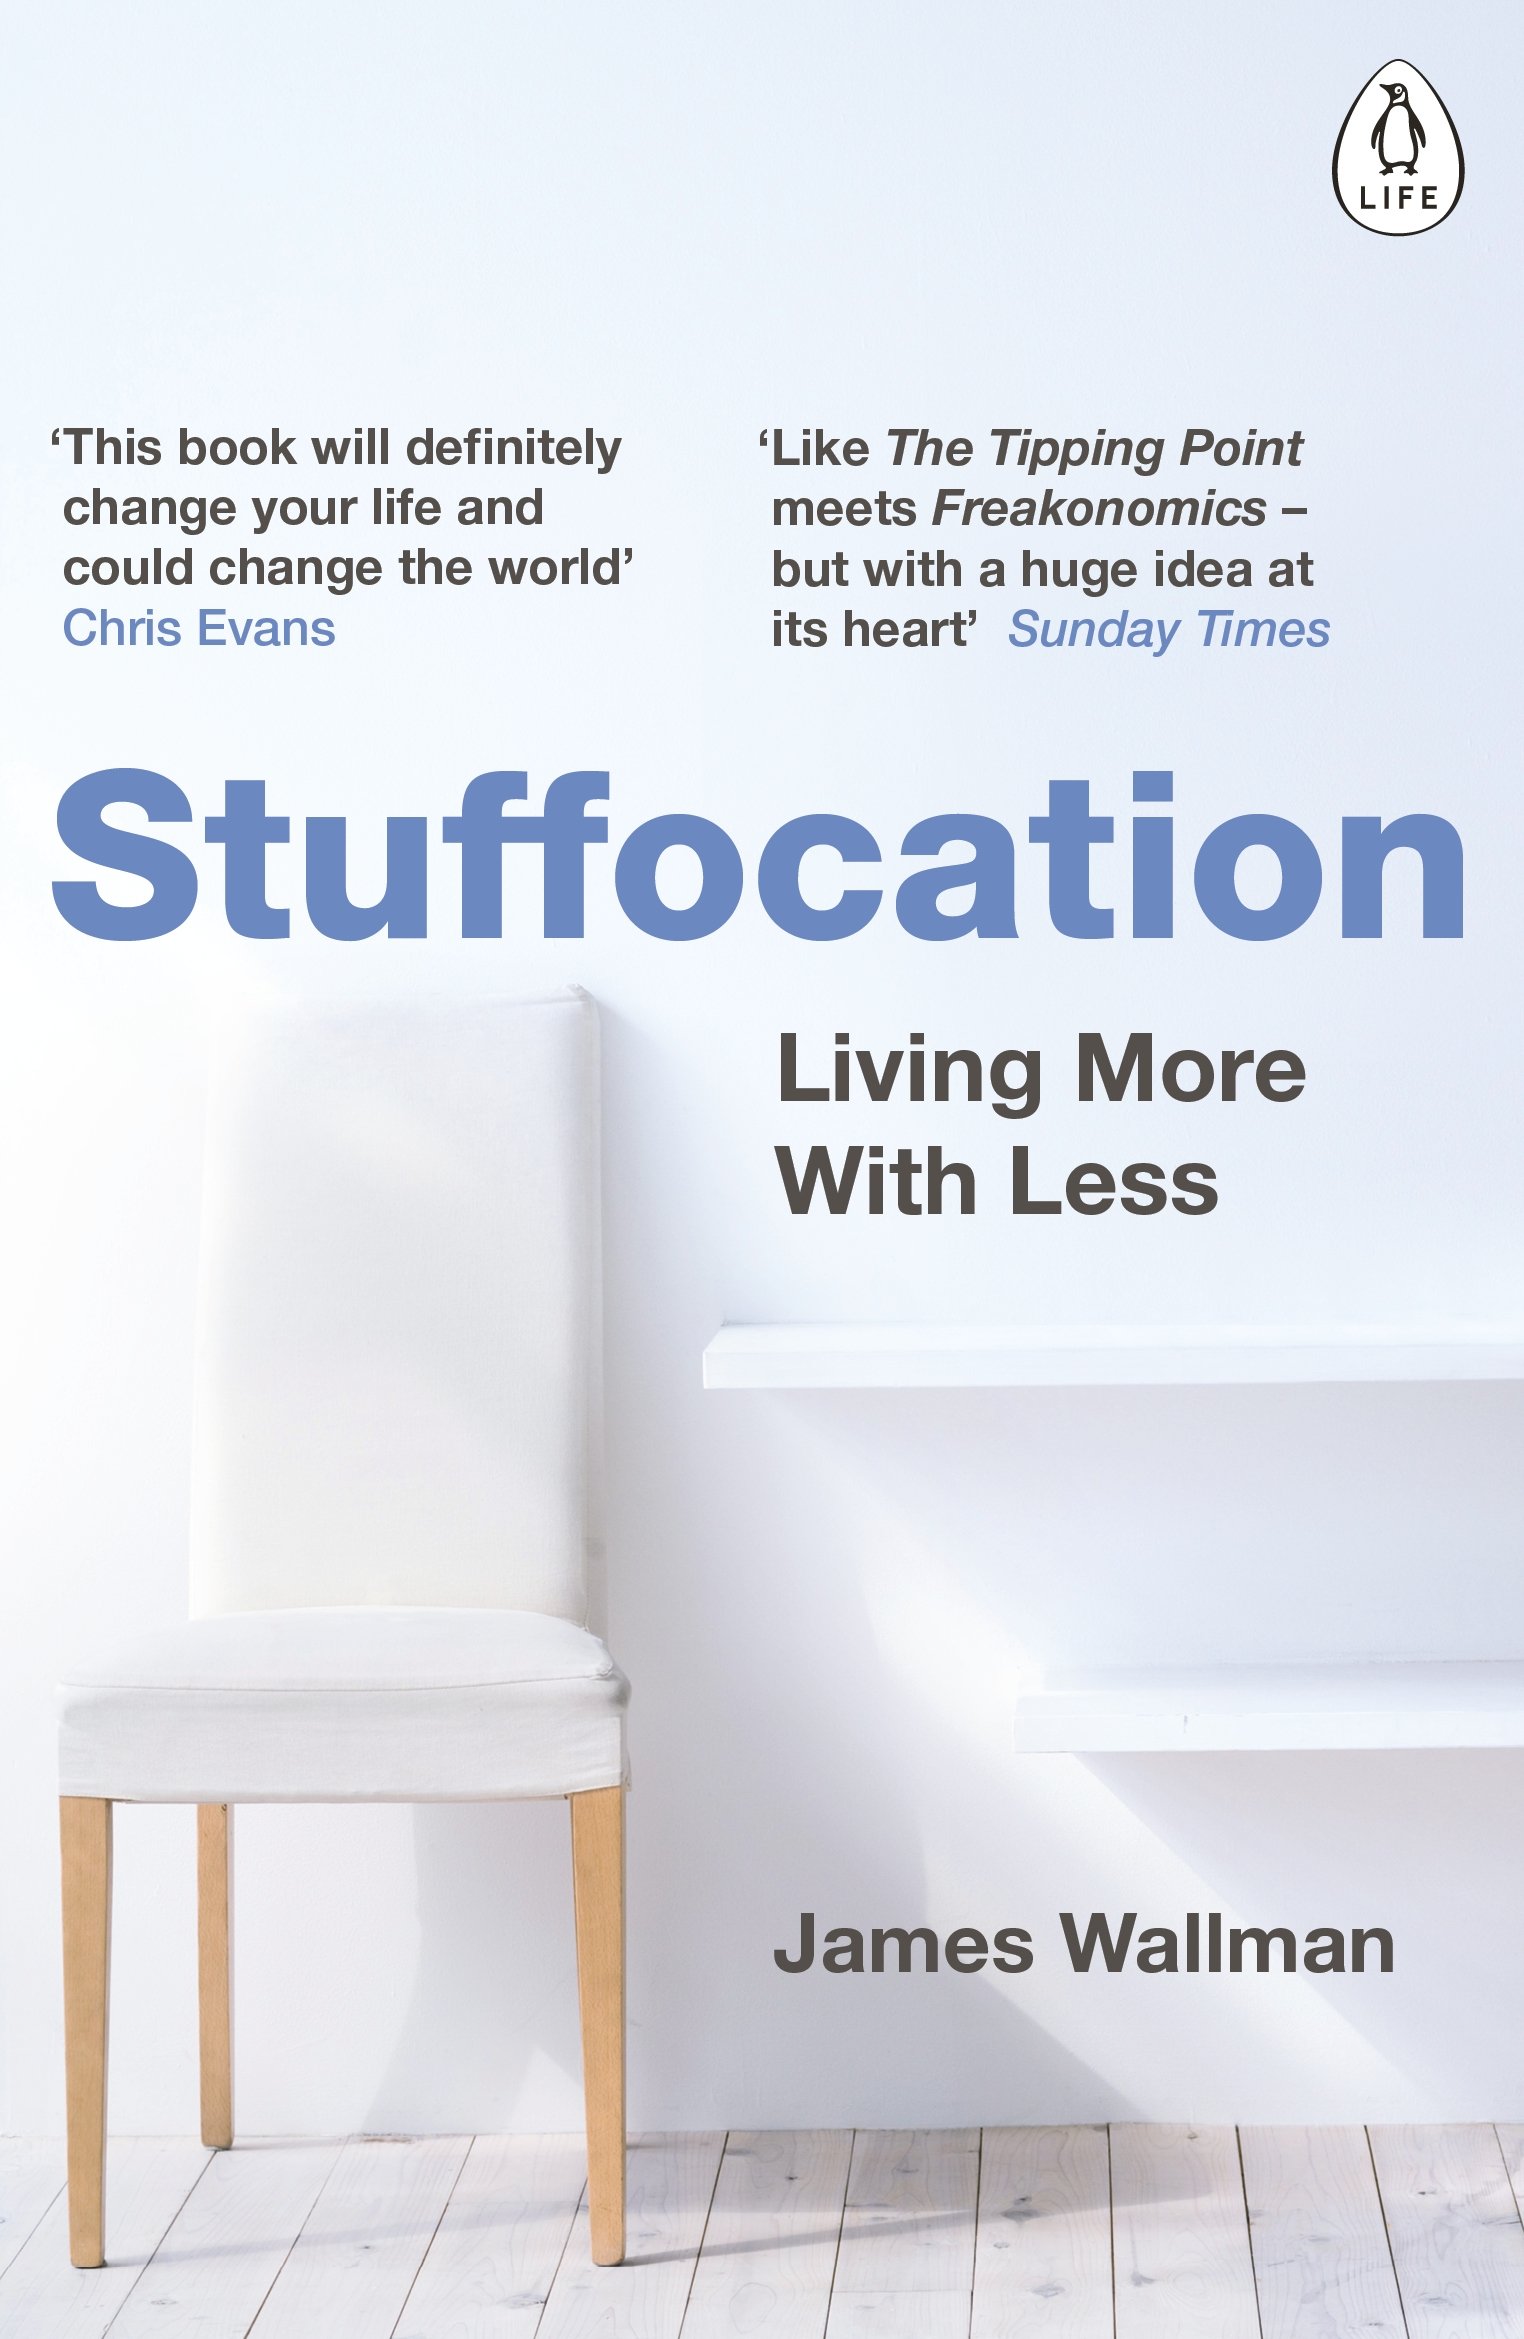 Stuffocation - Living More with Less